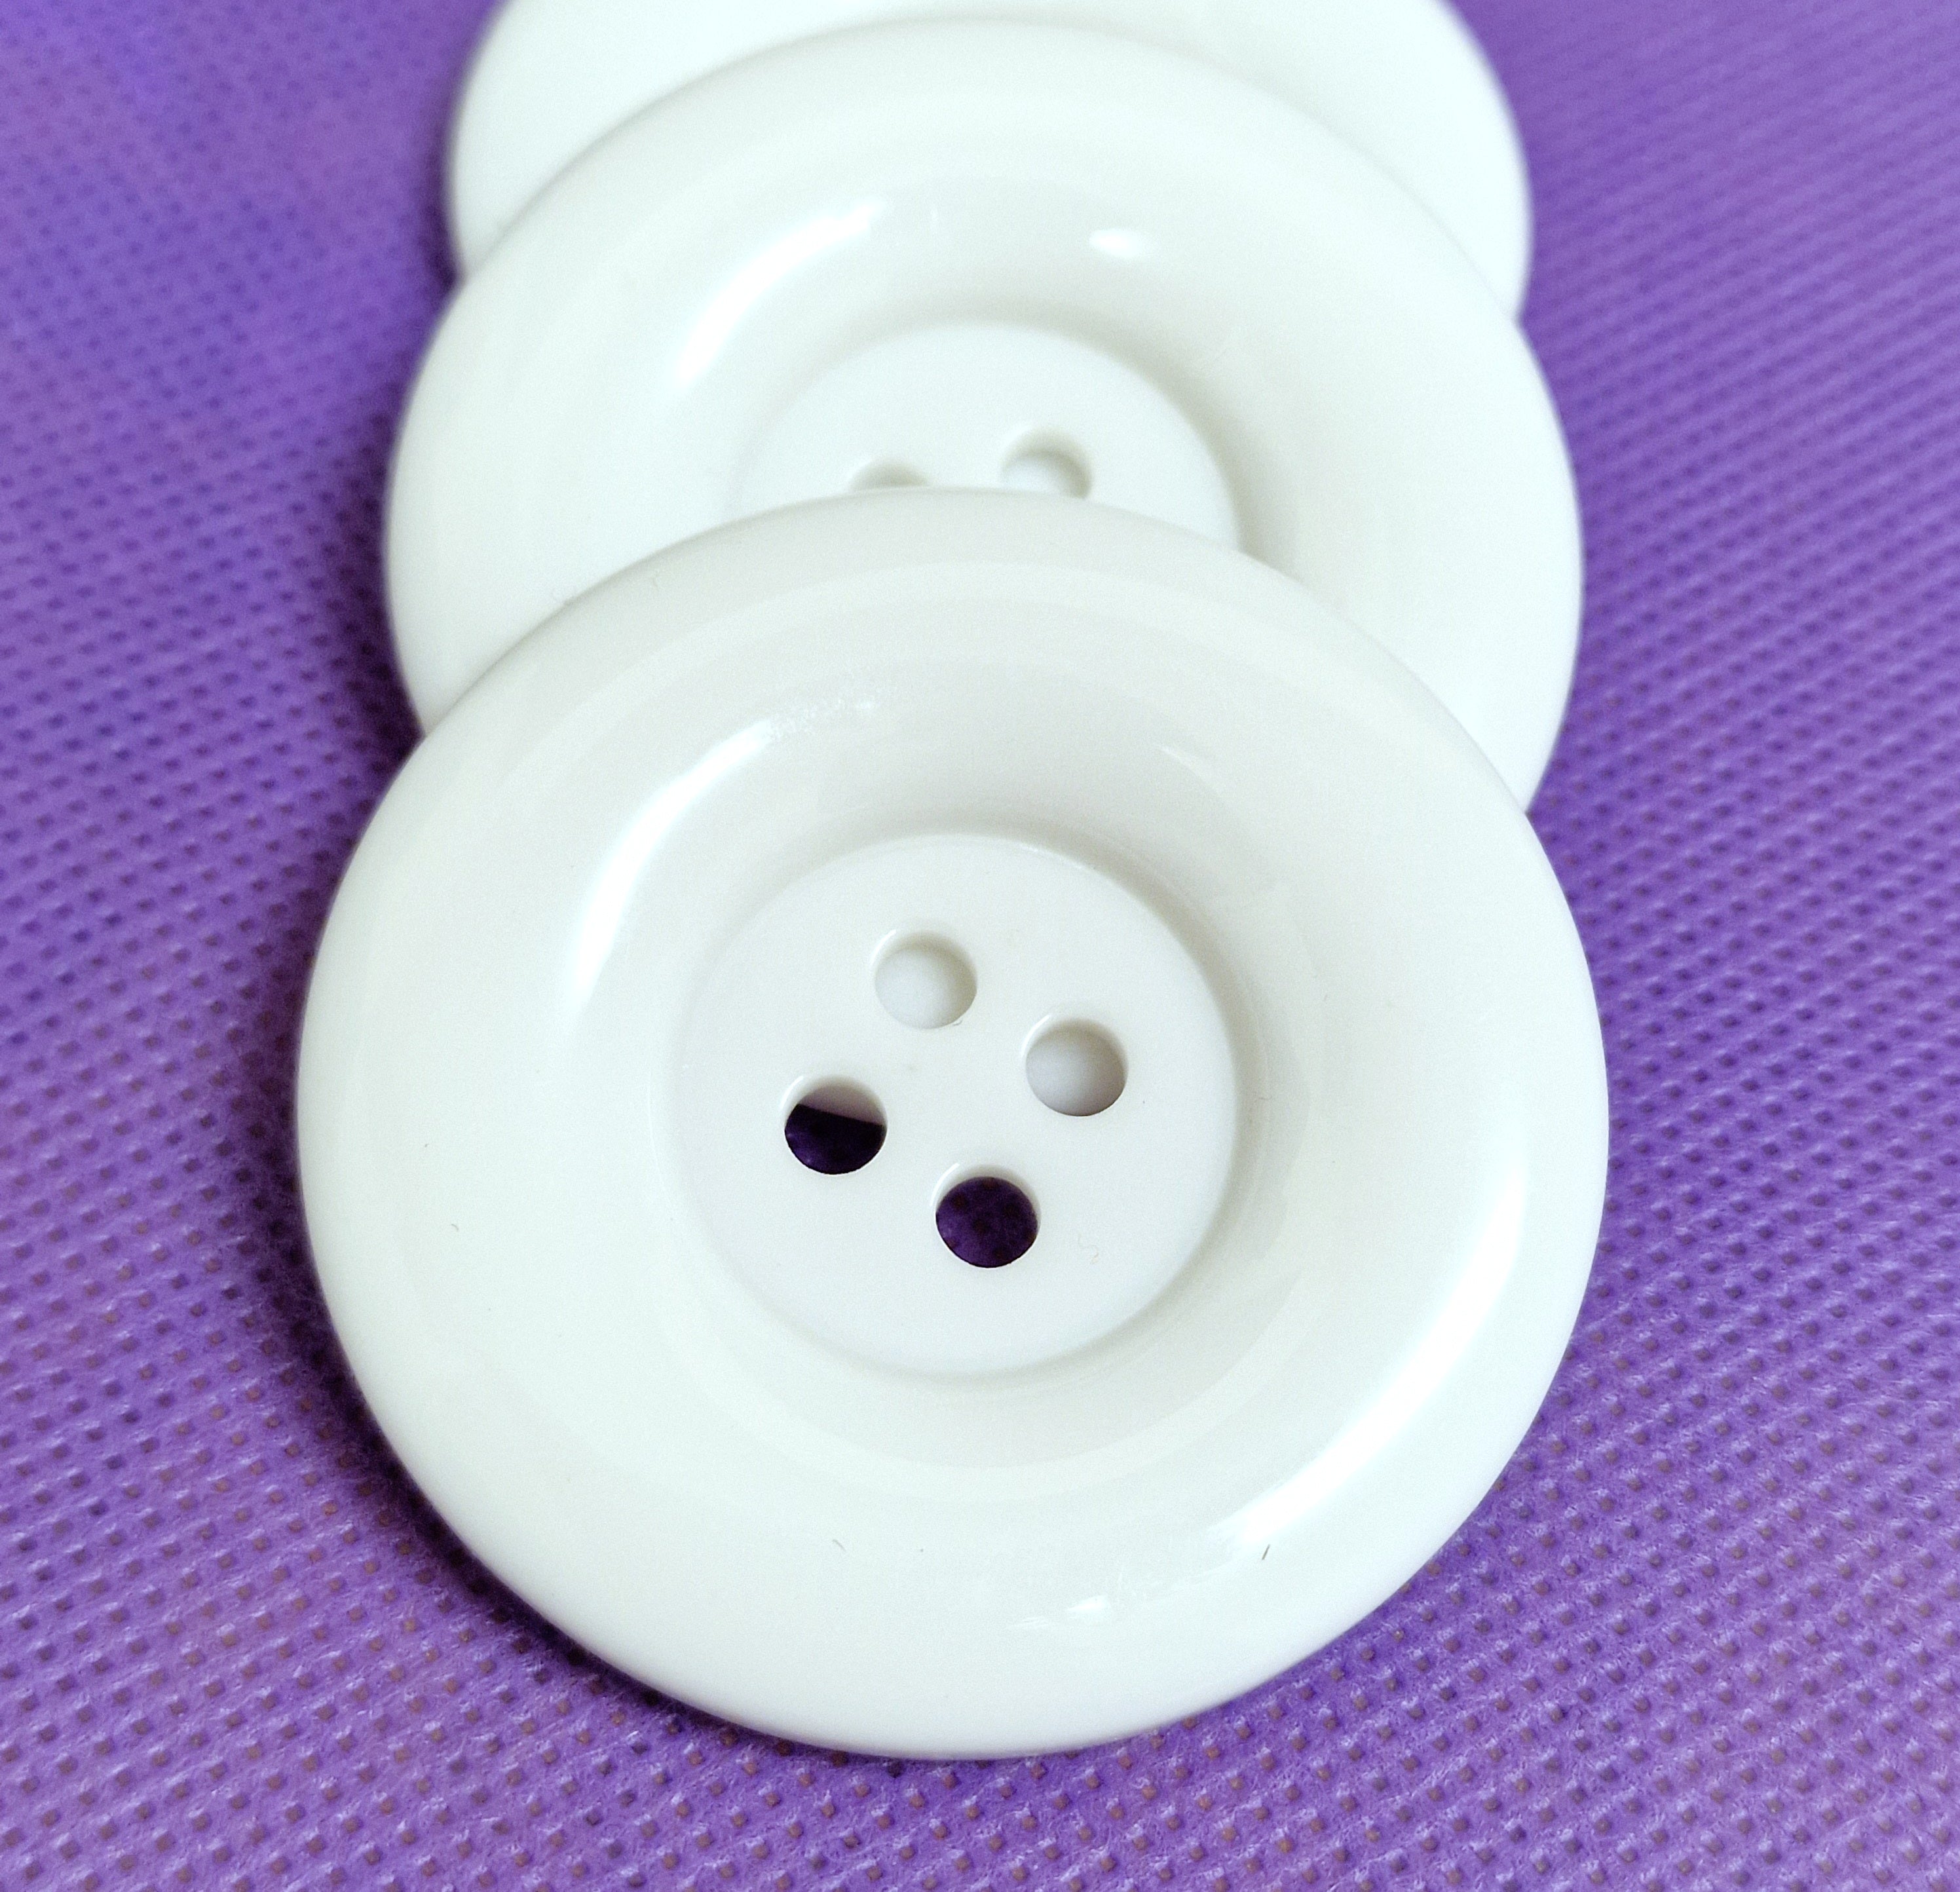 MajorCrafts 4pcs 50mm White 4 Holes Round Large Resin Sewing Buttons (wide edge)